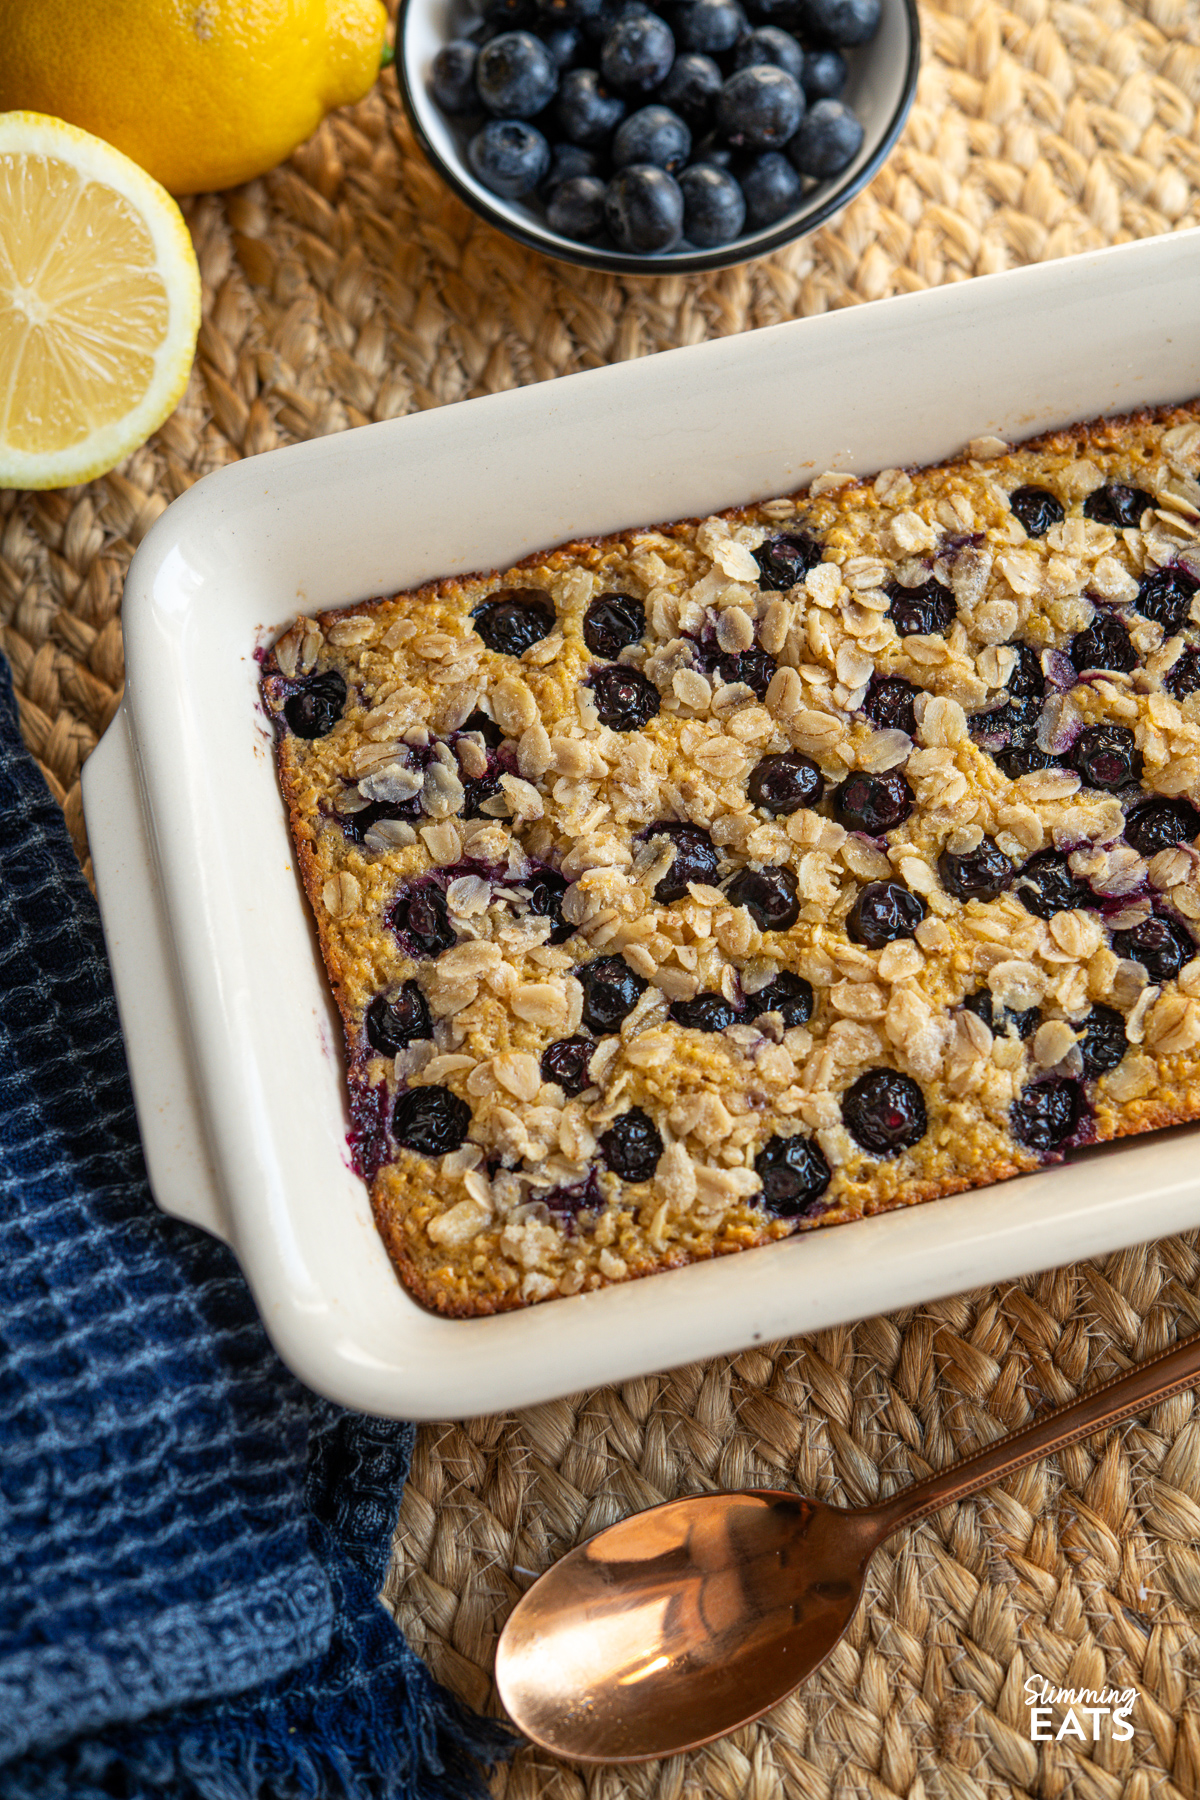 Freshly baked Lemon Blueberry Oats  in a baking dish, surrounded by a bowl of vibrant blueberrie, and slices of zesty lemon in the background.